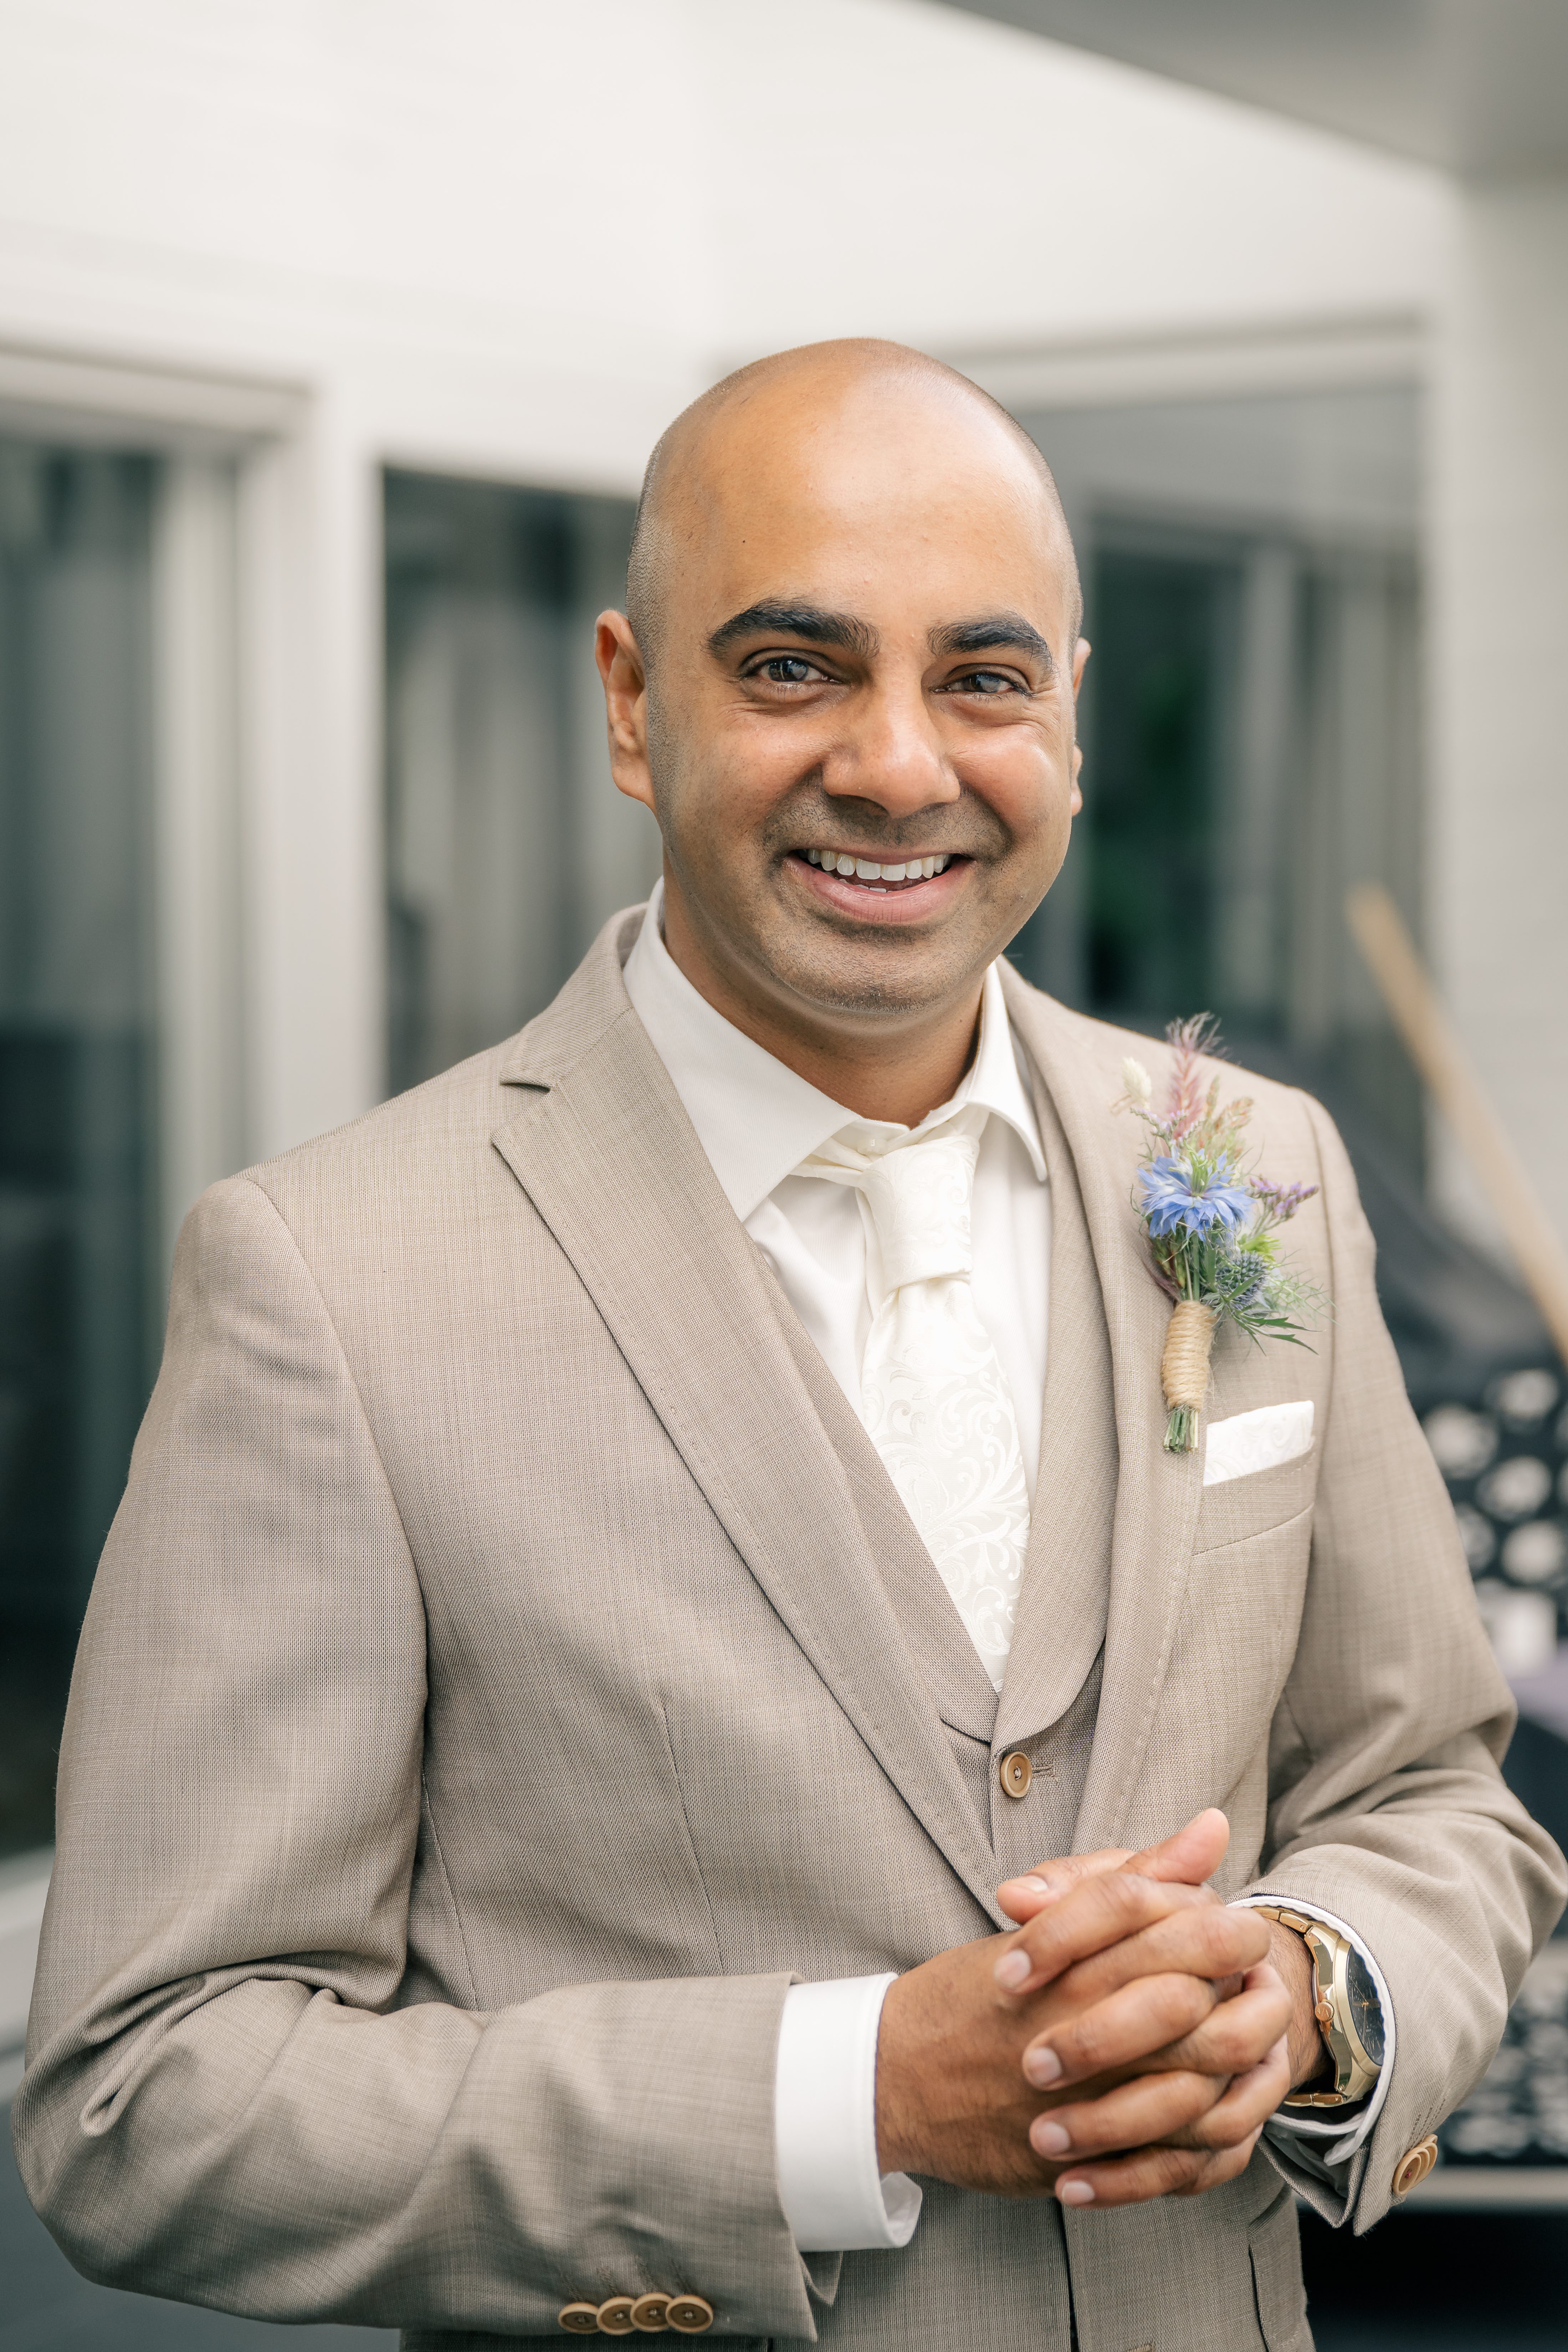 A groom in a beige suit looks excitedly at the camera as the bride walks up from behind for the First Look